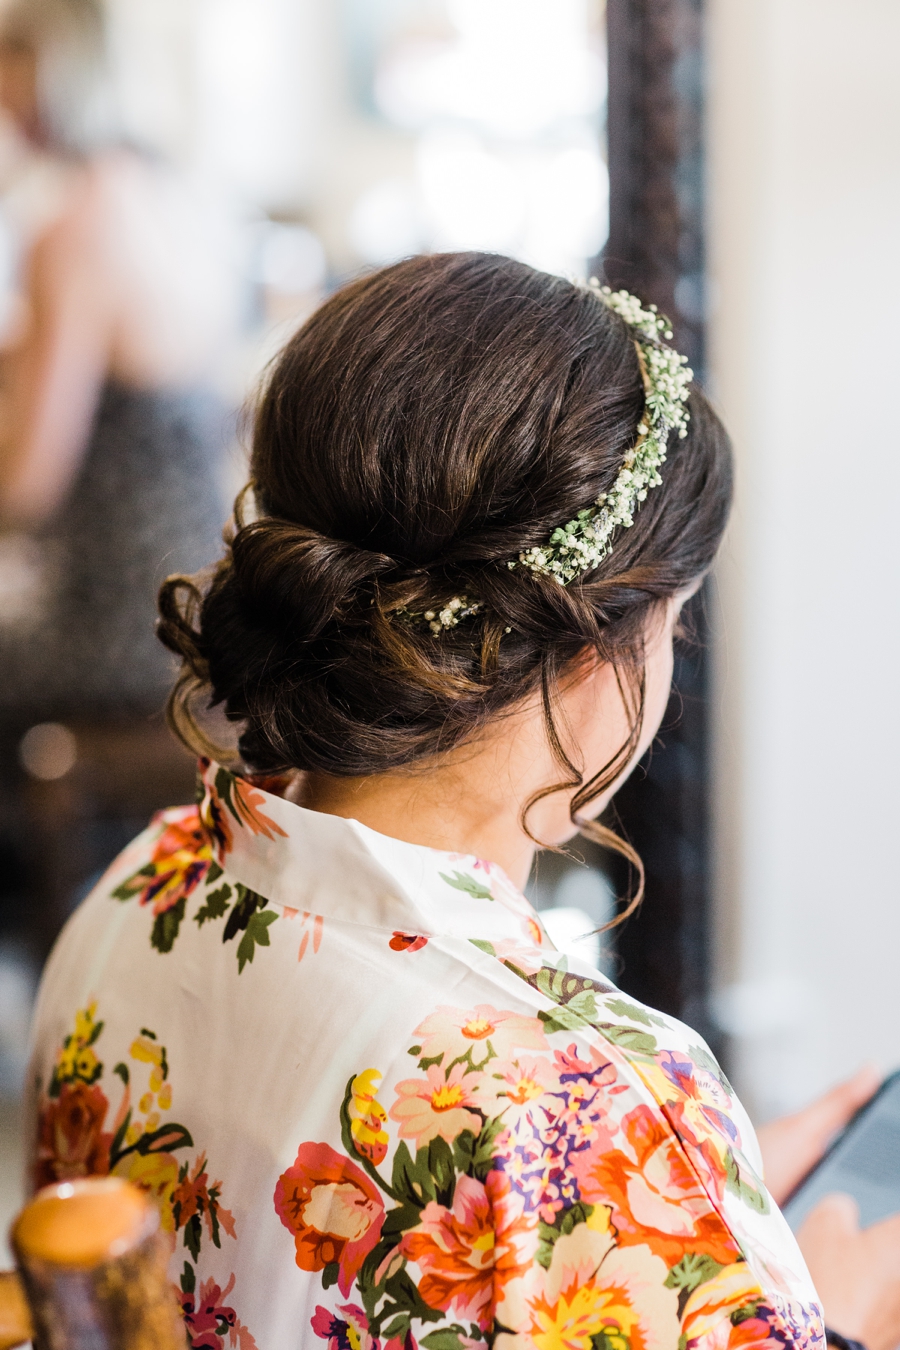 Bride getting ready for her wedding at Grand Targhee Resort in Wyoming